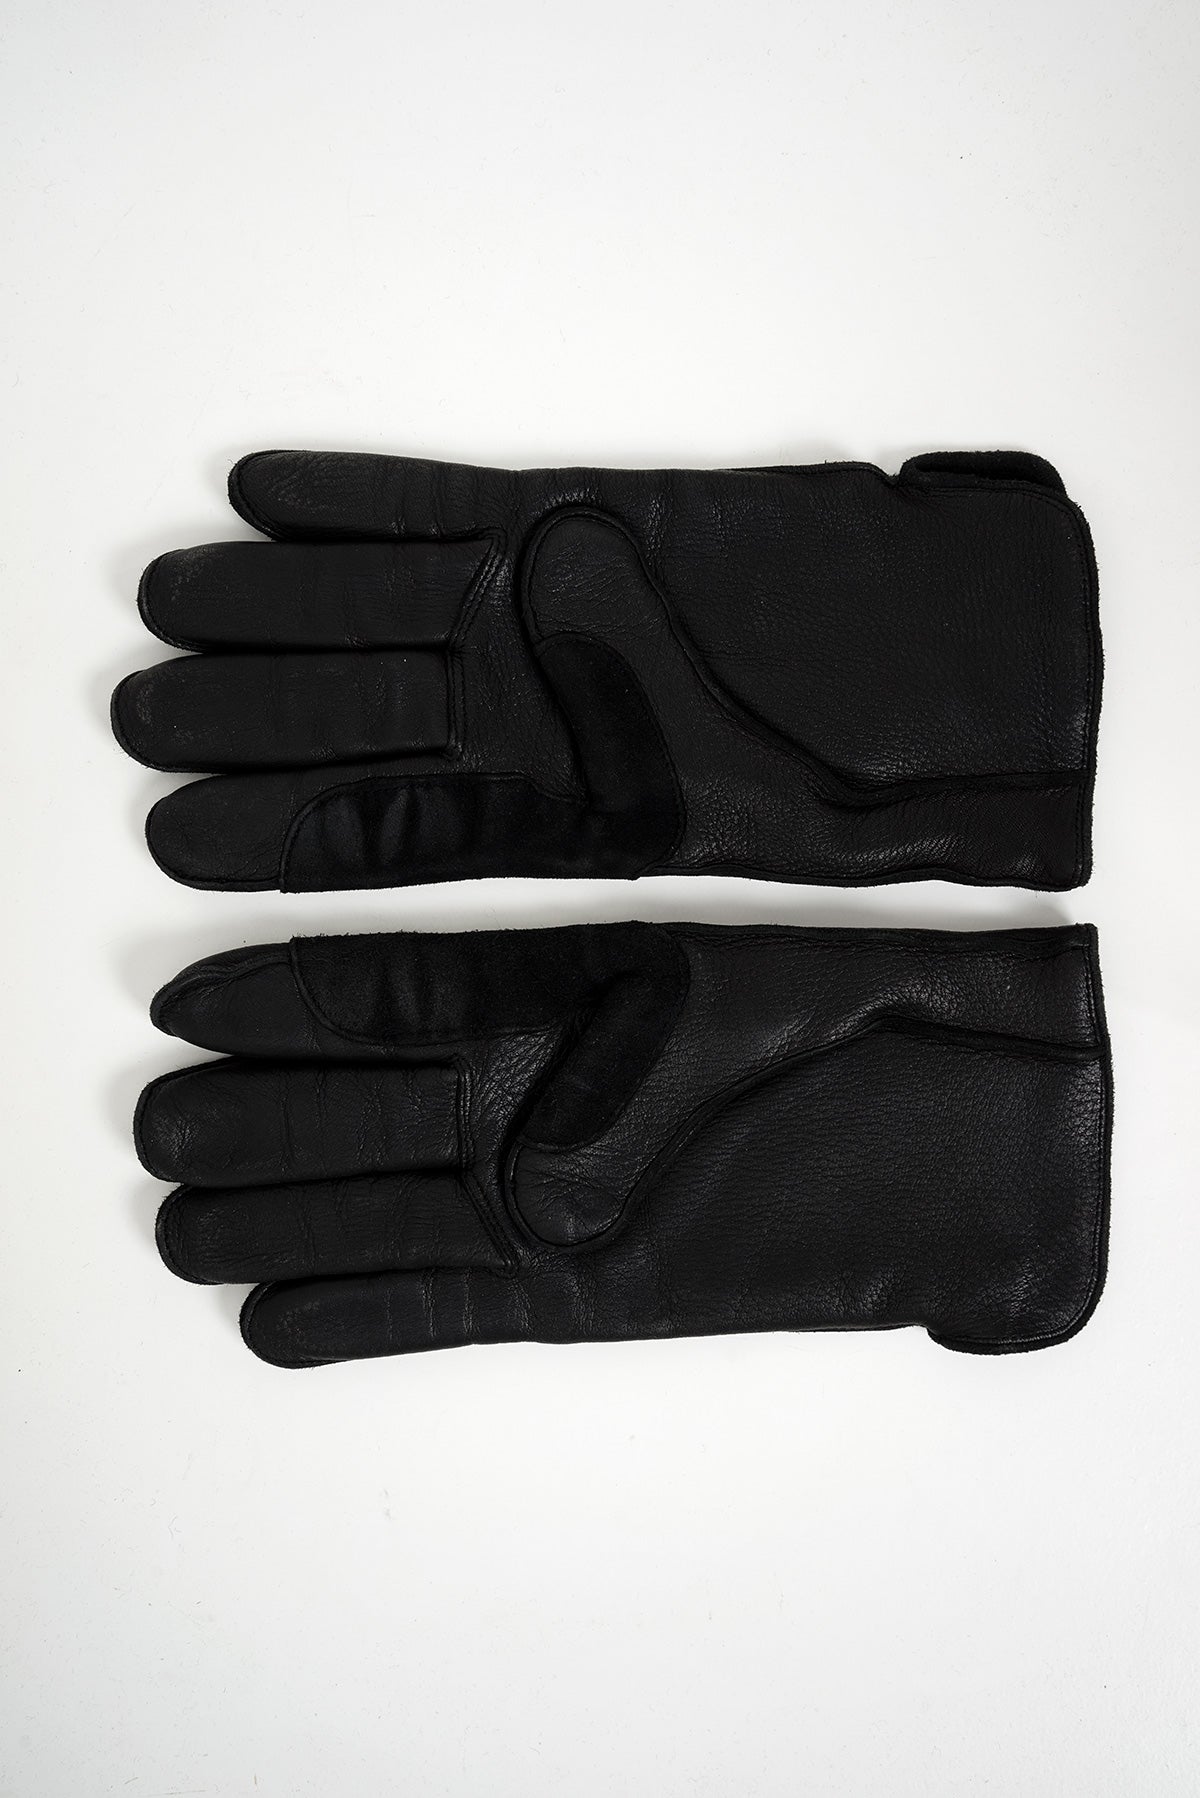 2003 A/W ARTICULATED FINGERS GLOVES